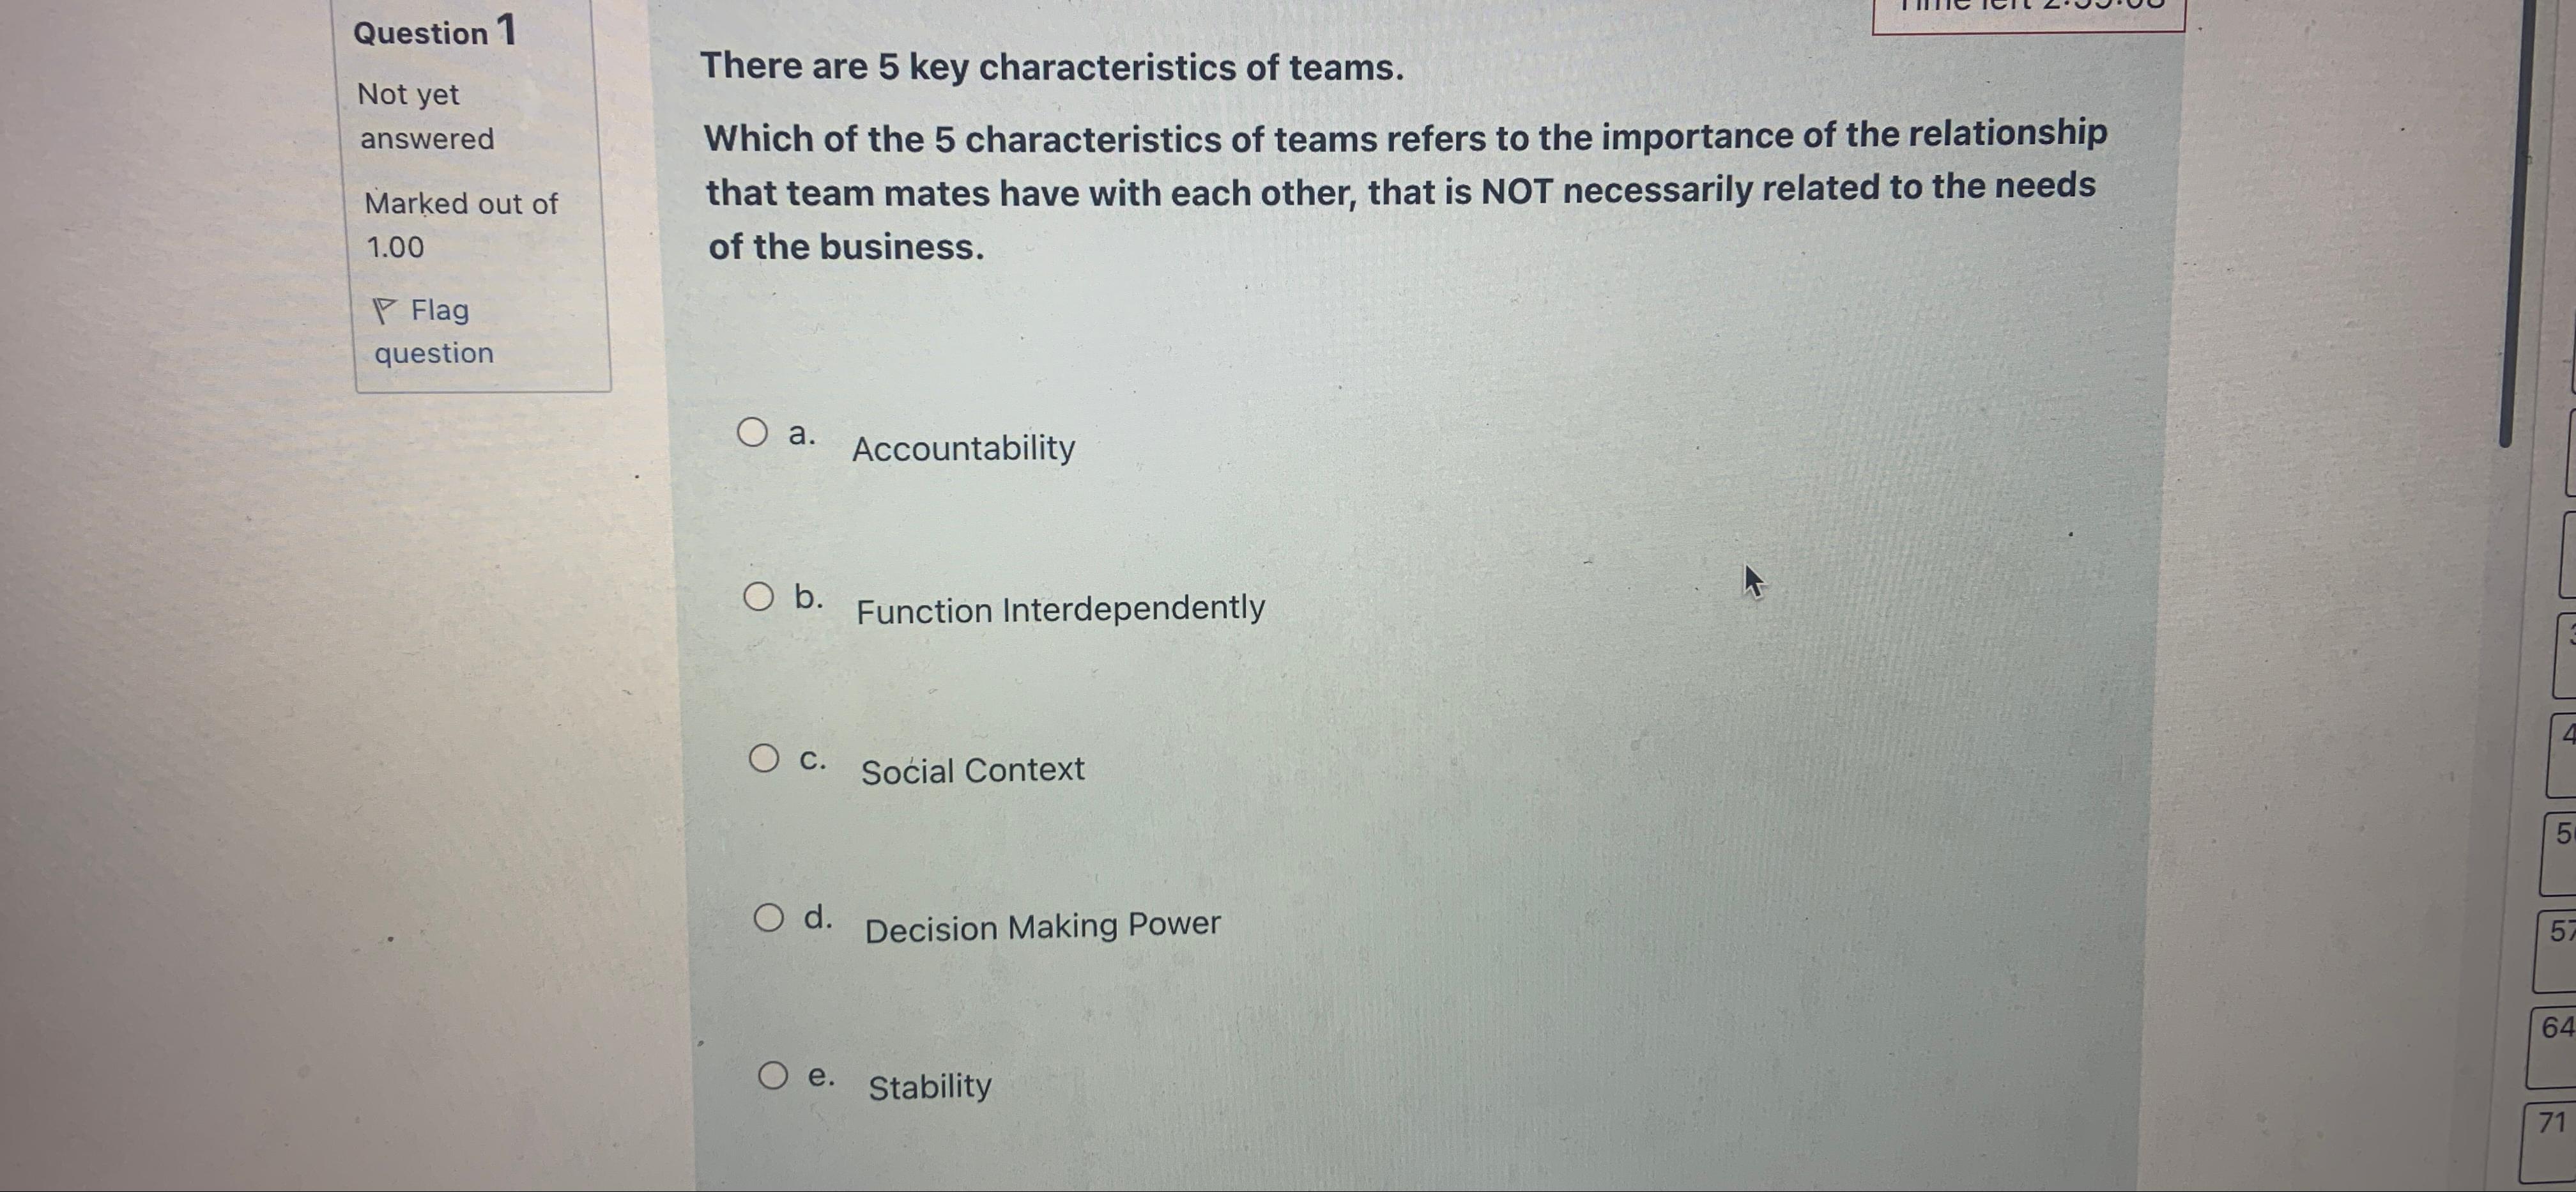 Question 1 Not yet answered Marked out of 1.00 Flag question There are 5 key characteristics of teams. Which